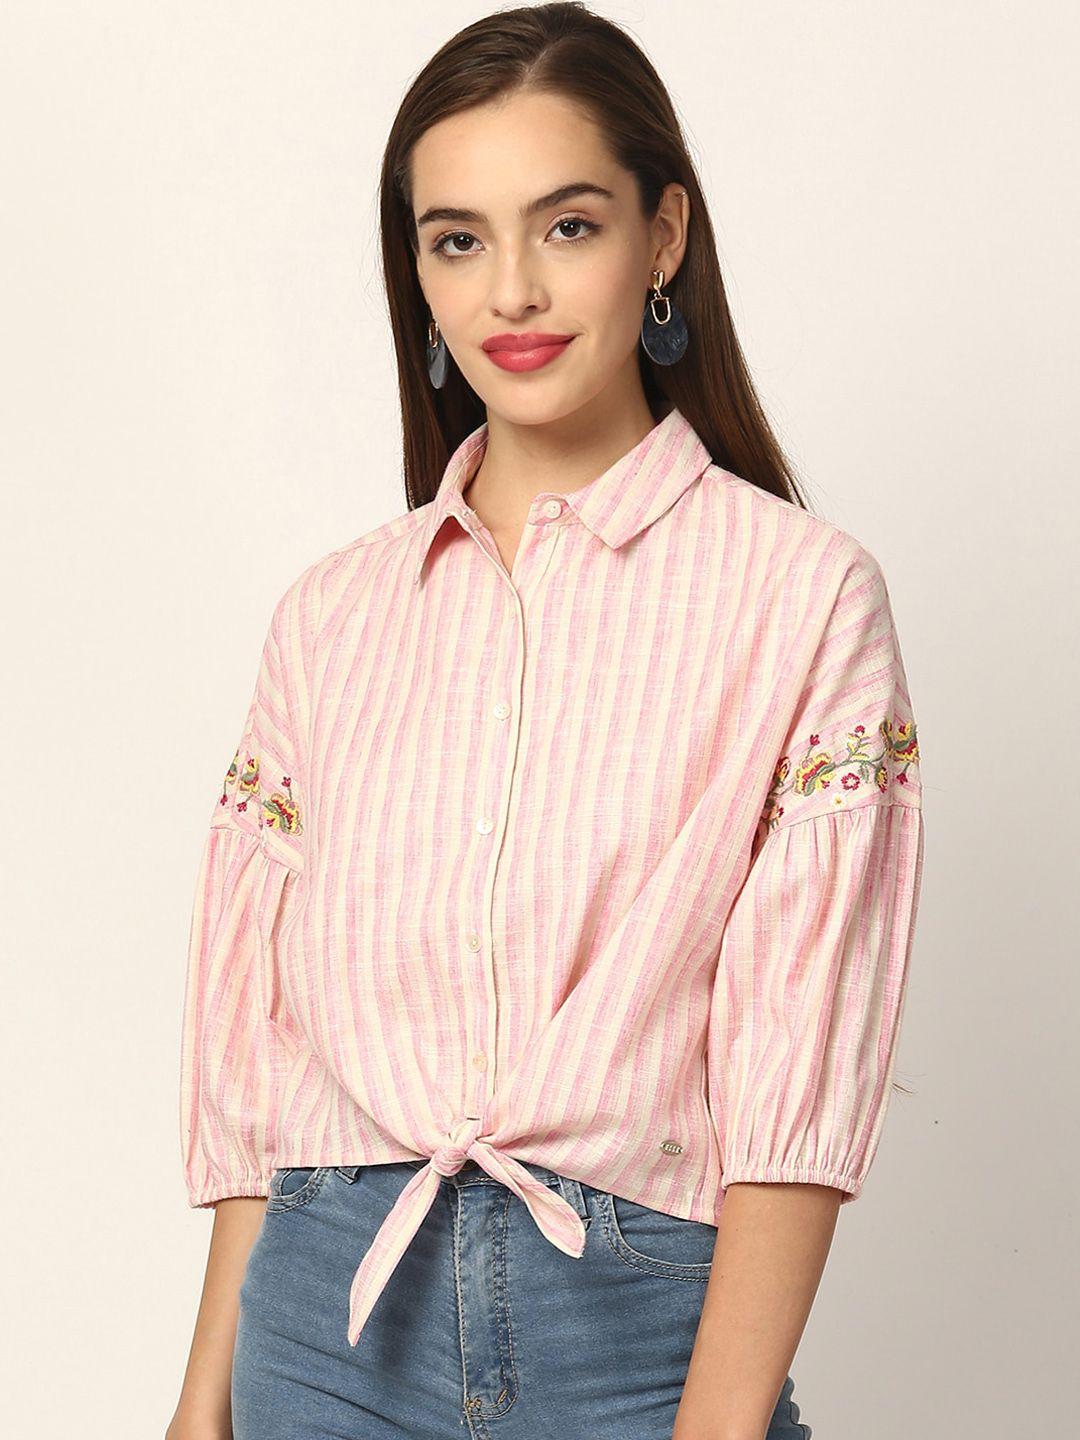 elle pink & yellow striped shirt style top